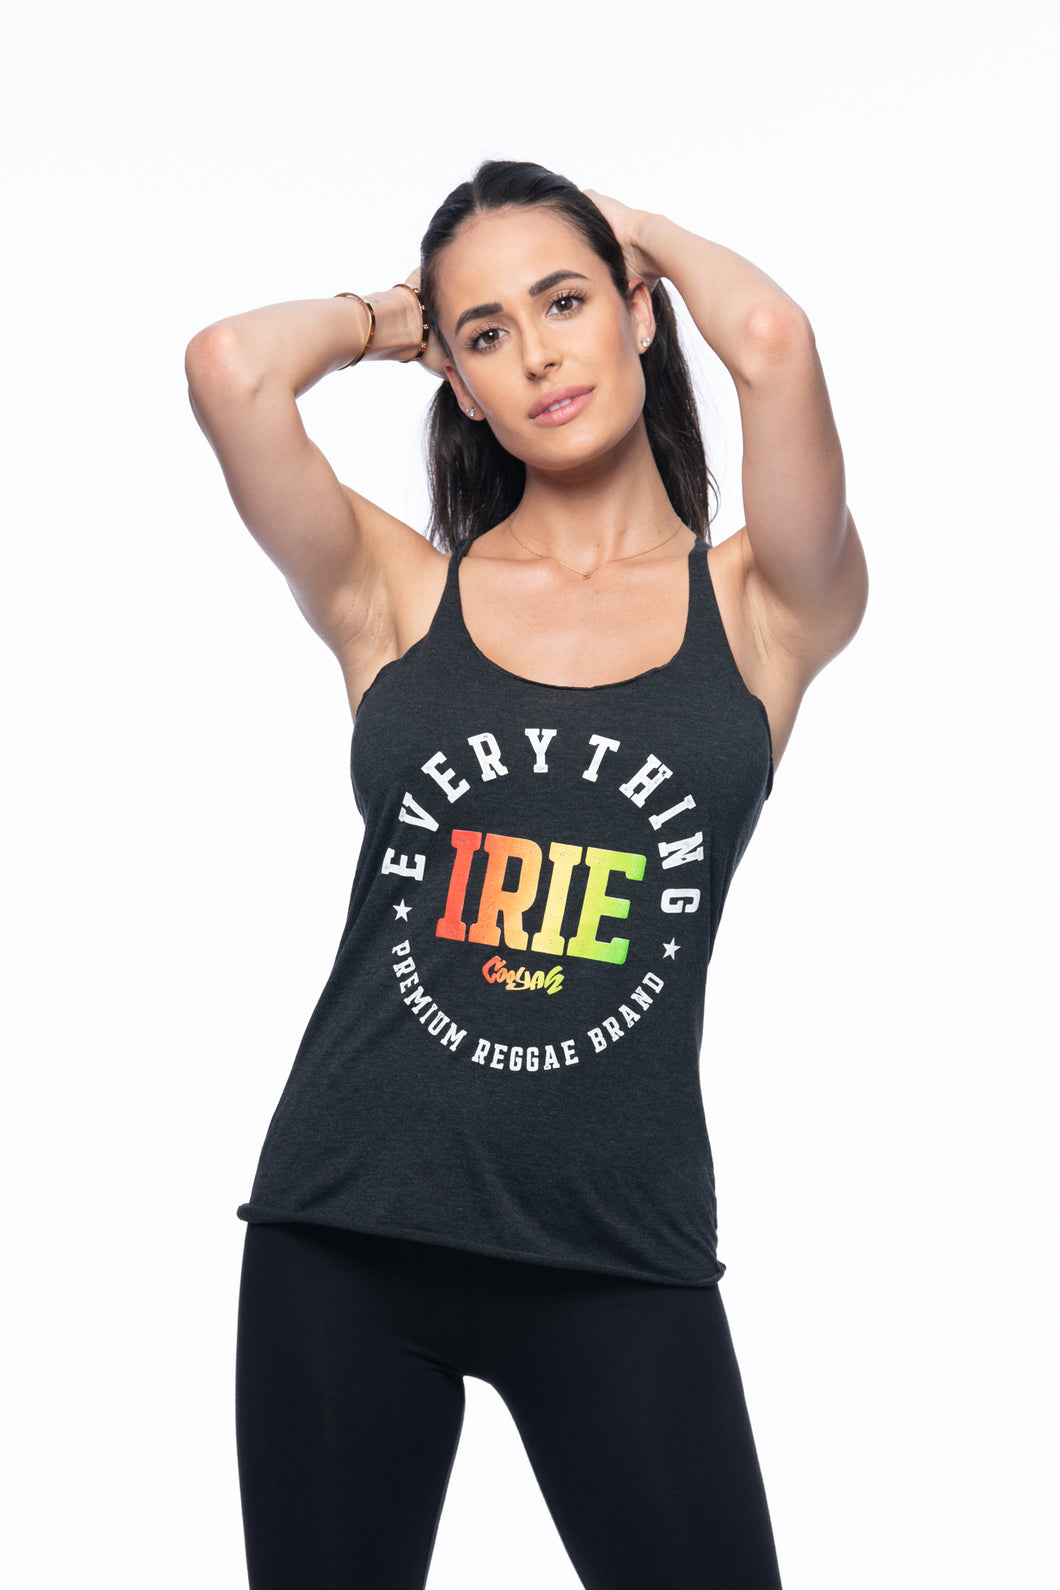 Women’s Tank Top with Everything Irie Graphic